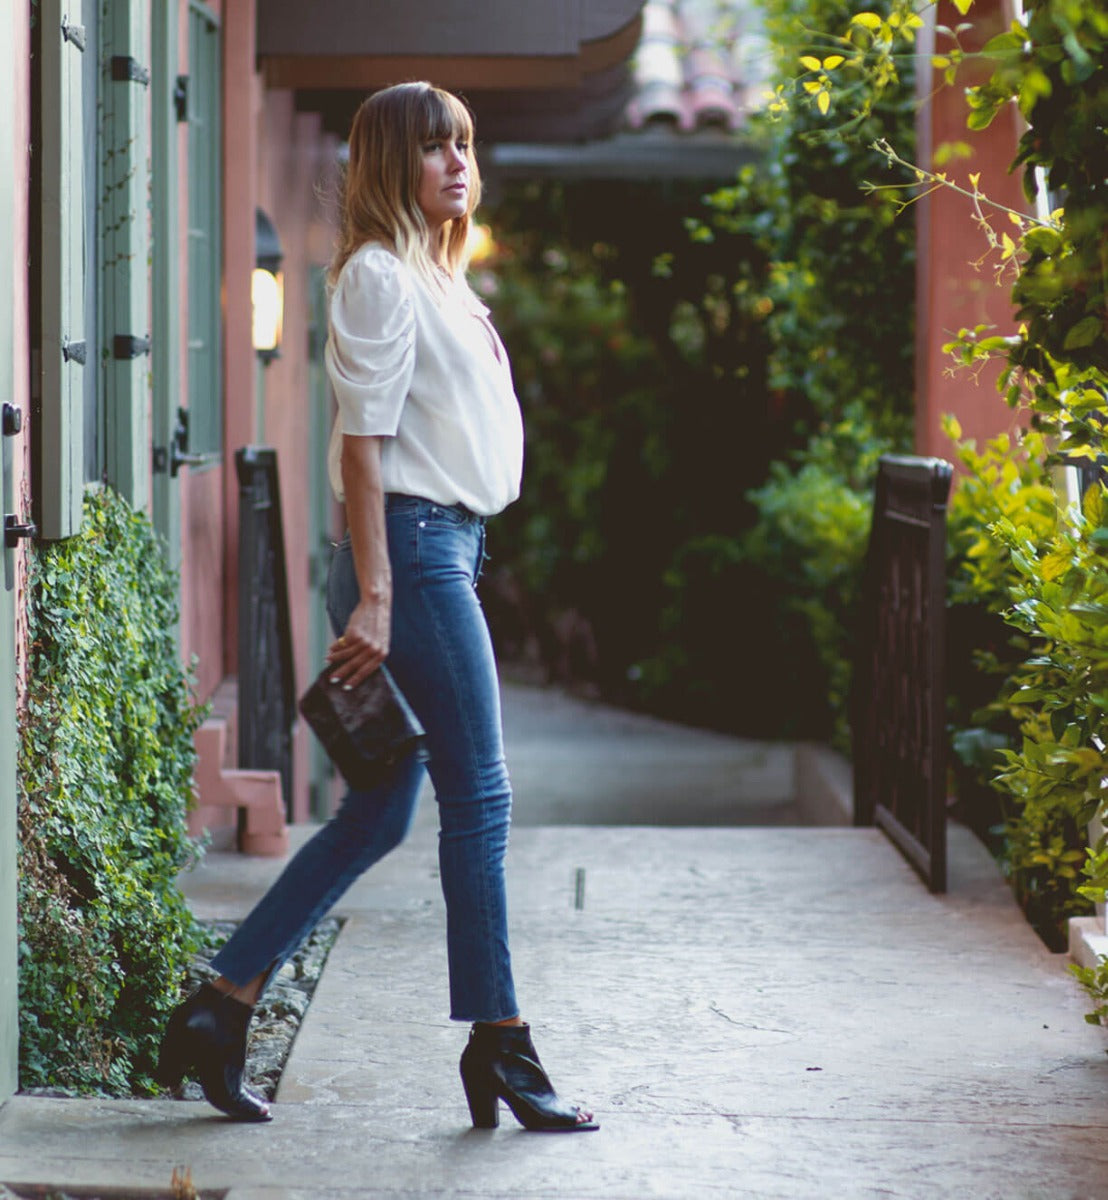 A woman wearing Bed Stu jeans and a Bed Stu white blouse walking down a sidewalk.